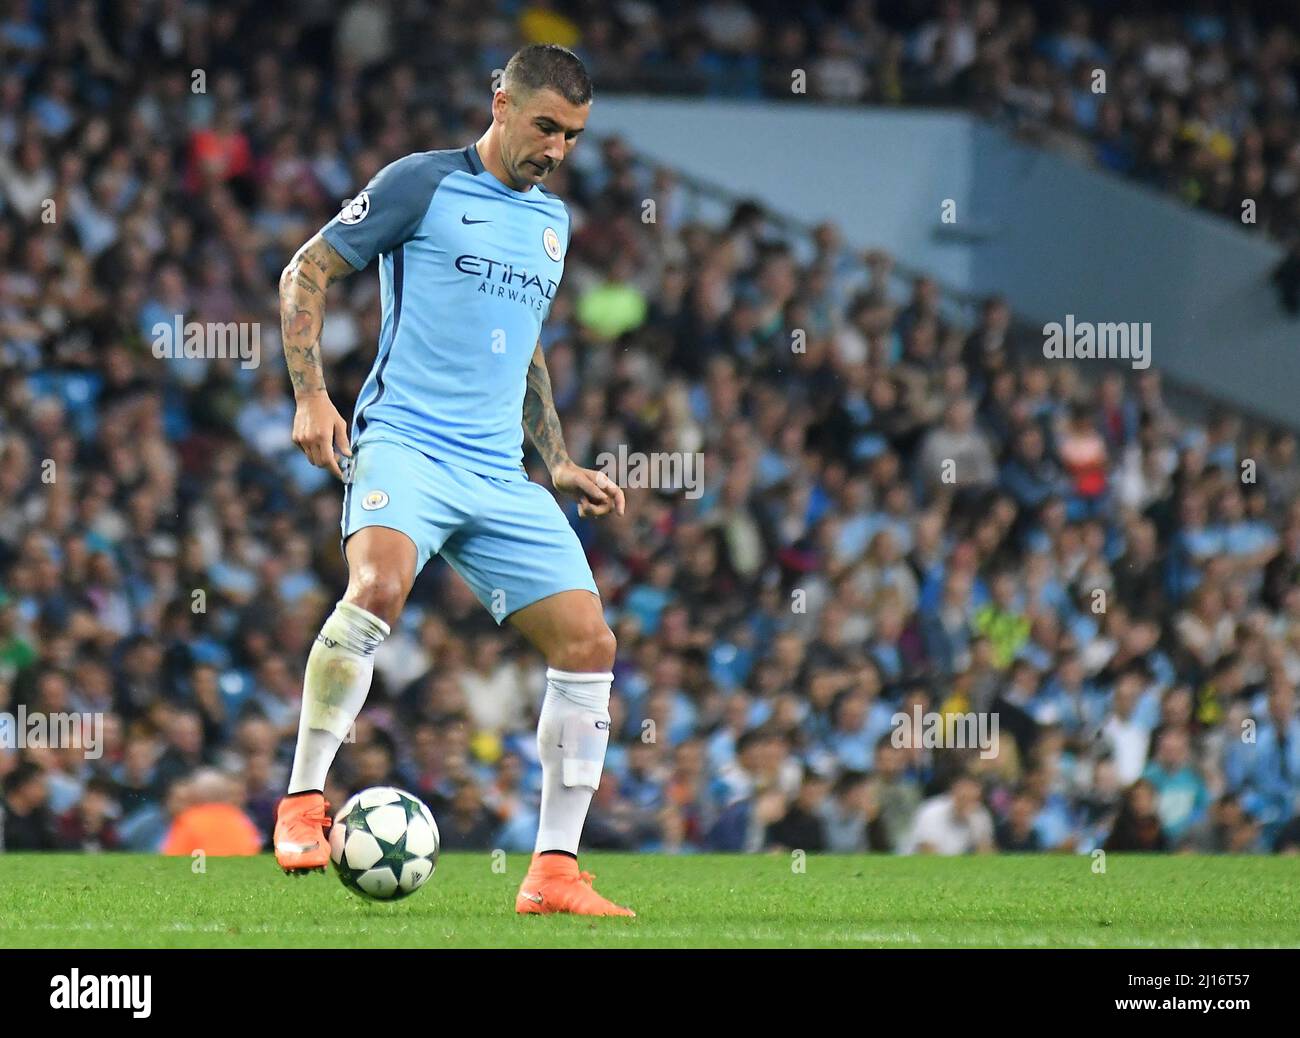 MANCHESTER, ENGLAND - AUGUST 24, 2016: Aleksandar Kolarov of City pictured during the second leg of the 2016/17 UEFA Champions League tie between Manchester City (Engalnd) and FCSB (Romania) at Etihad Stadium. Copyright: Cosmin Iftode/Picstaff Stock Photo